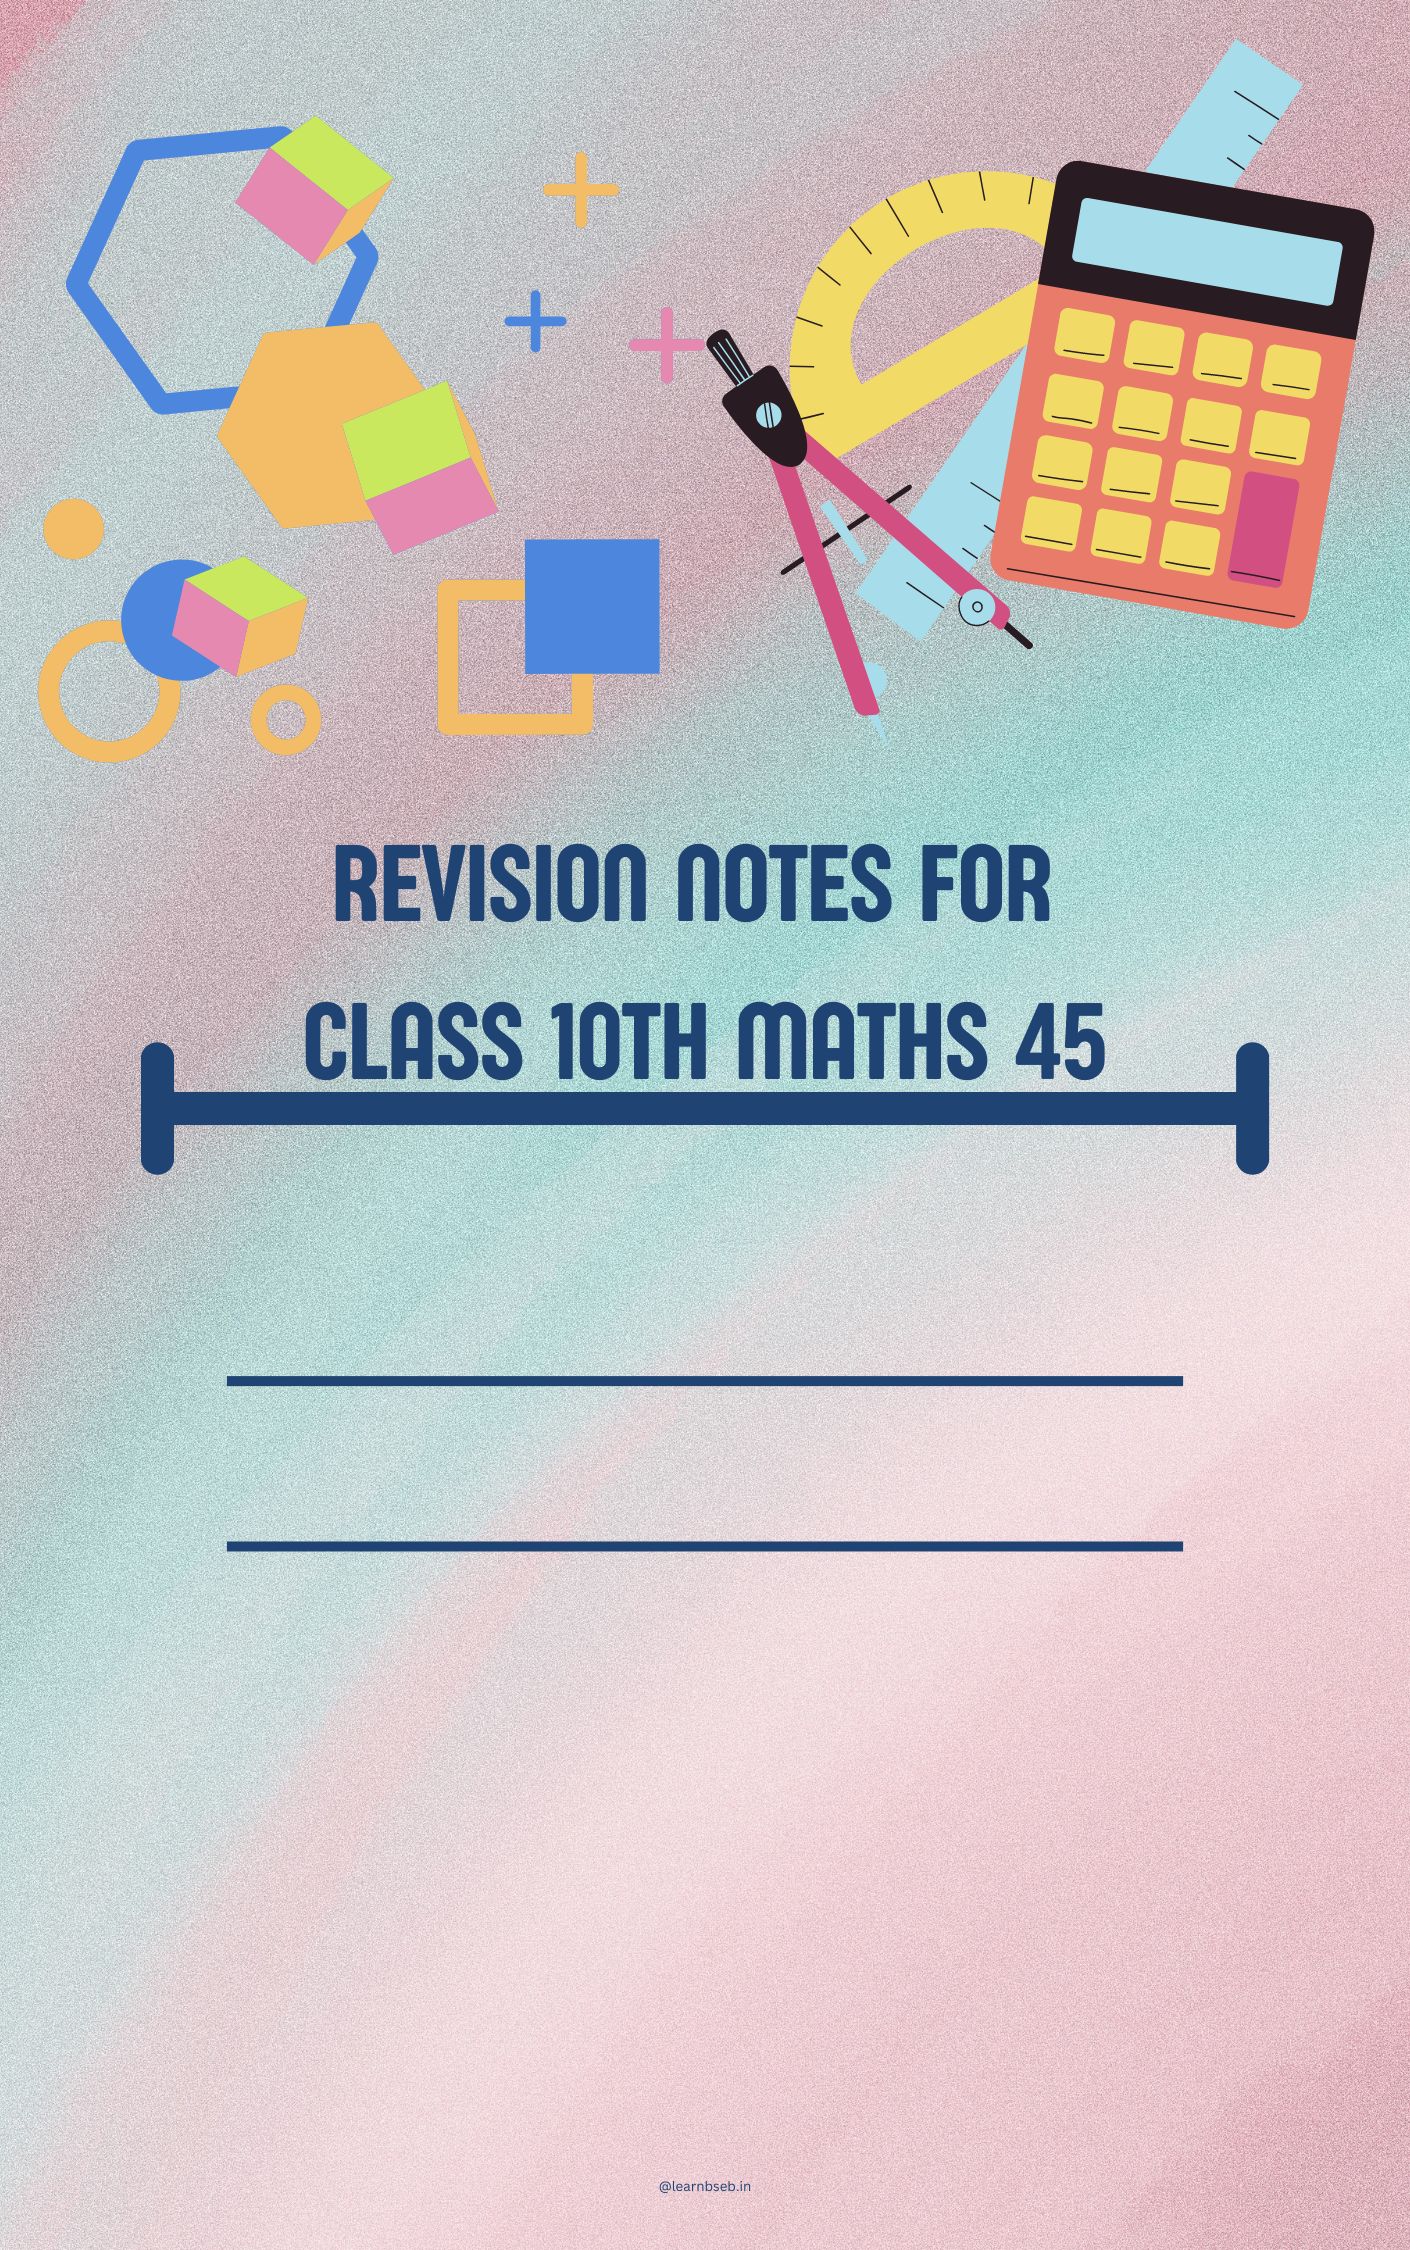 Revision Notes For Class 10th Maths